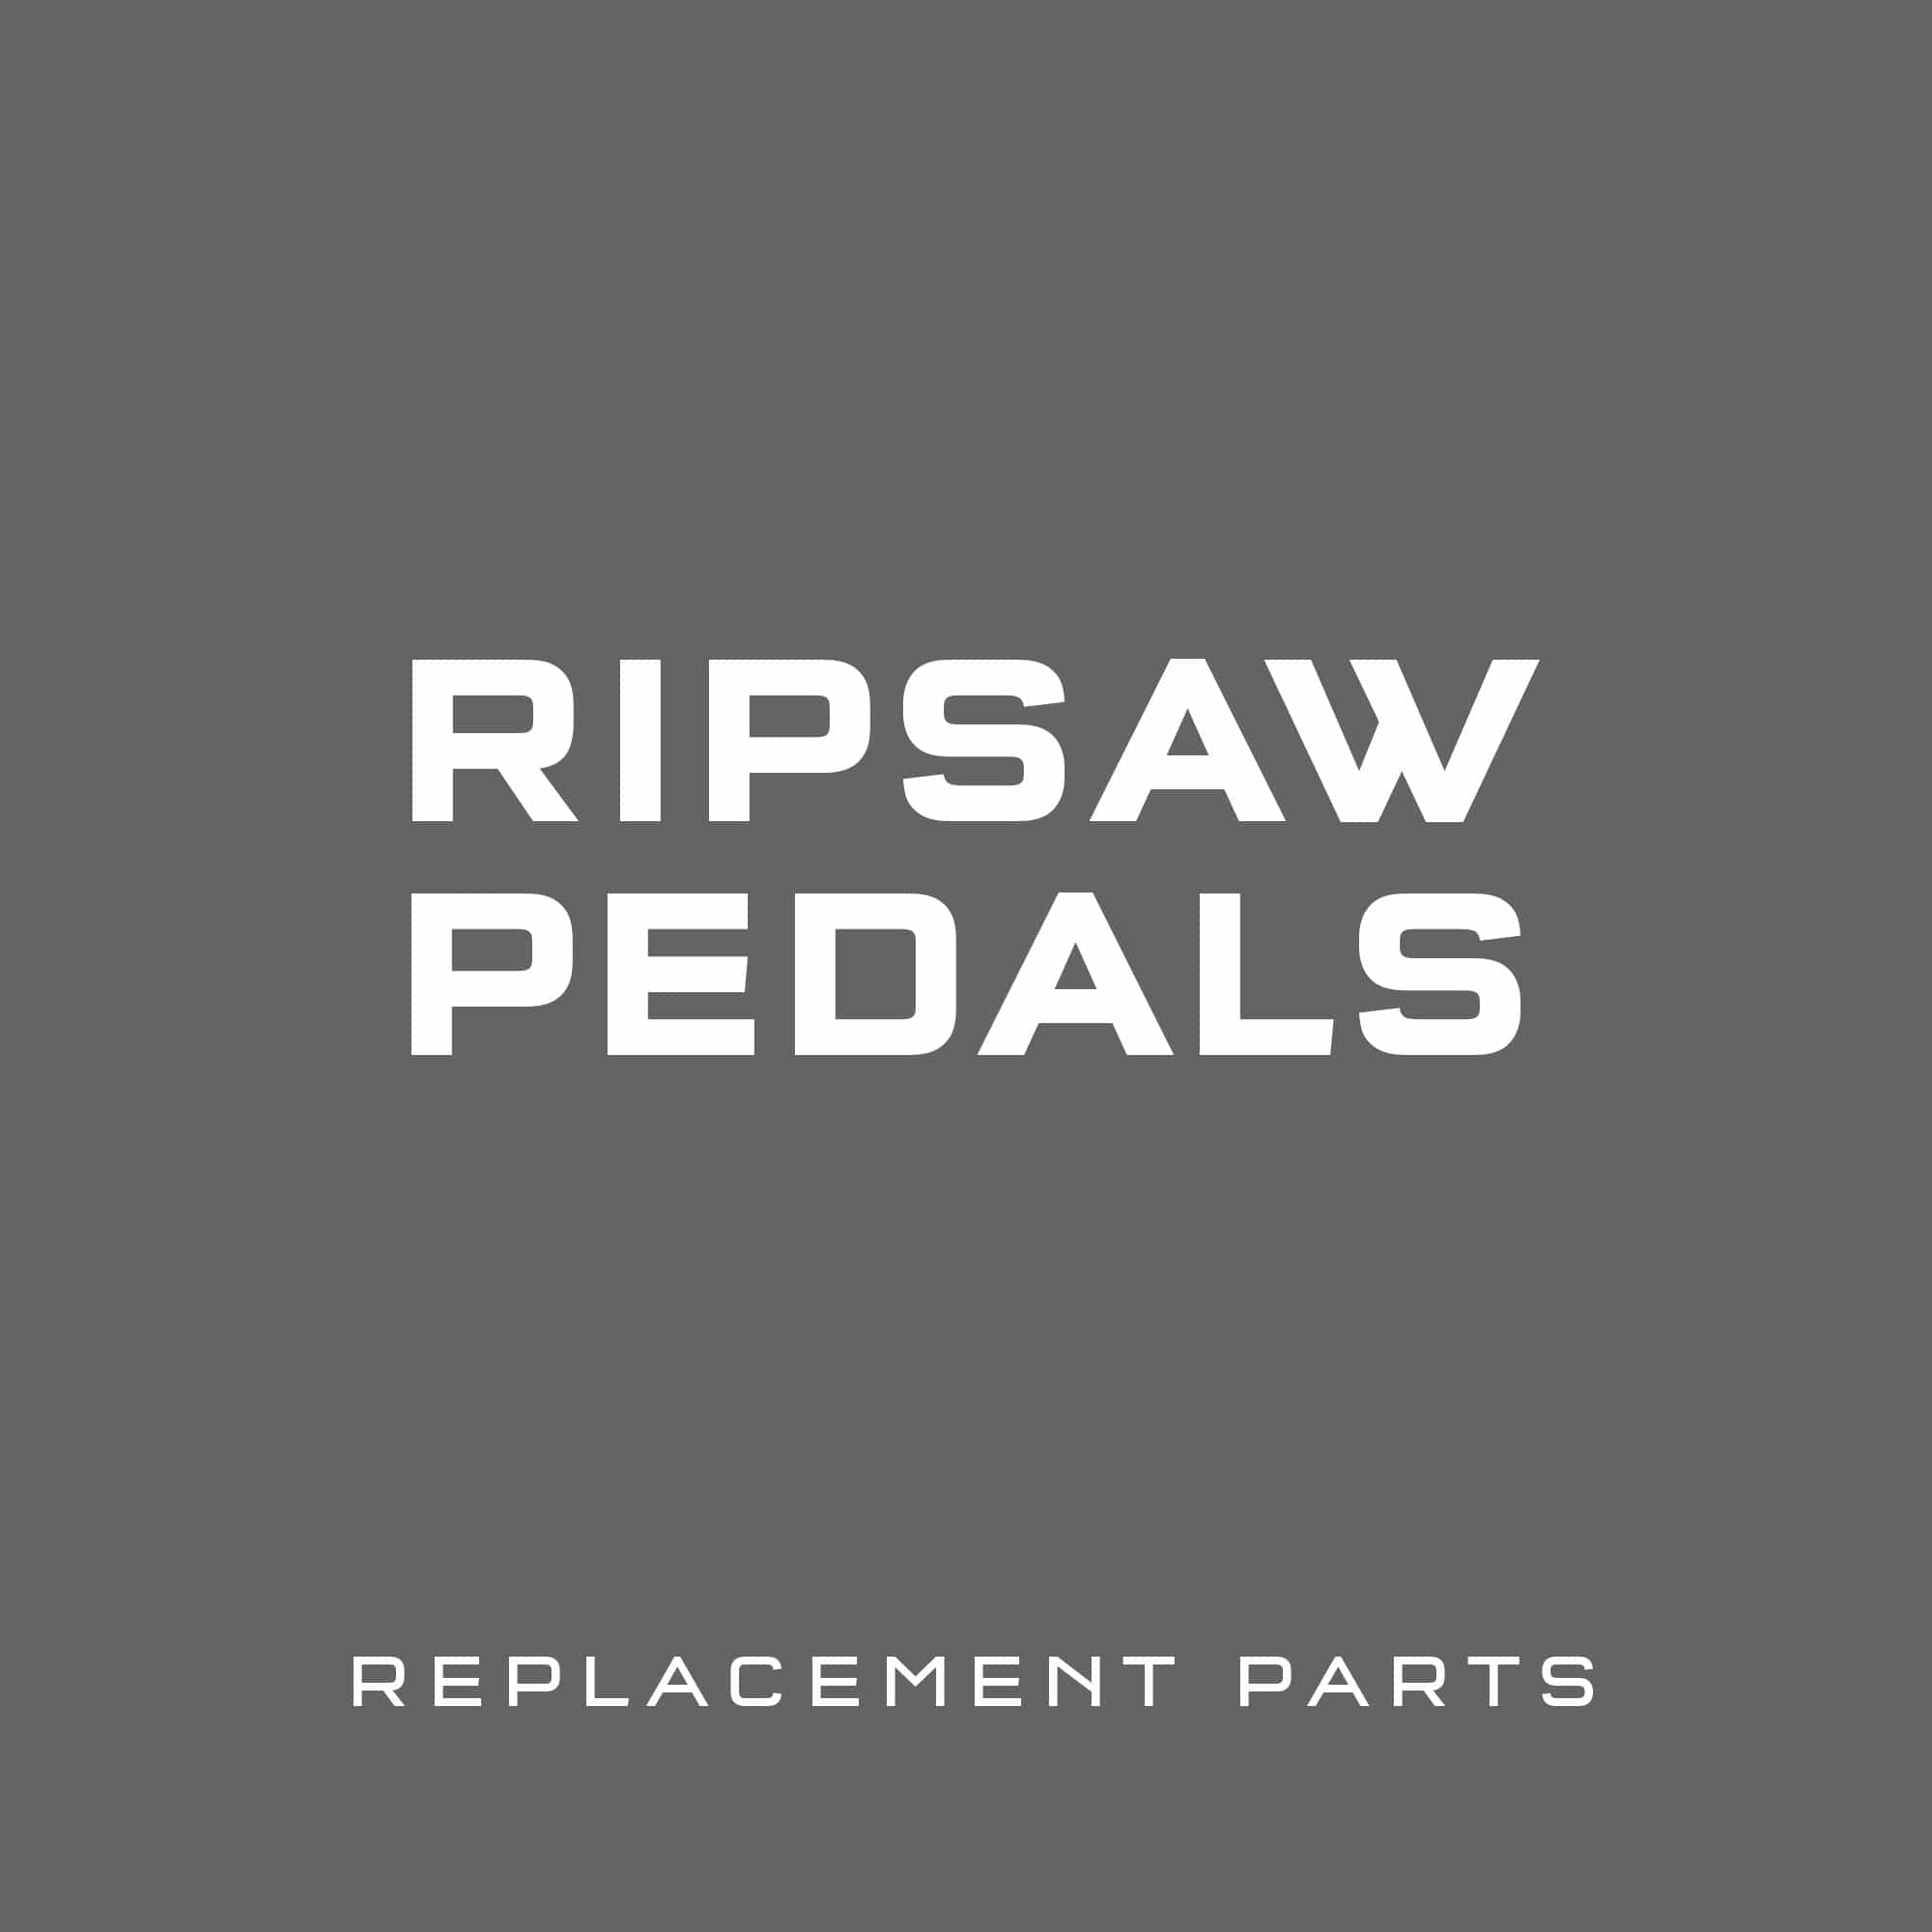 Ripsaw Pedals Replacement Parts